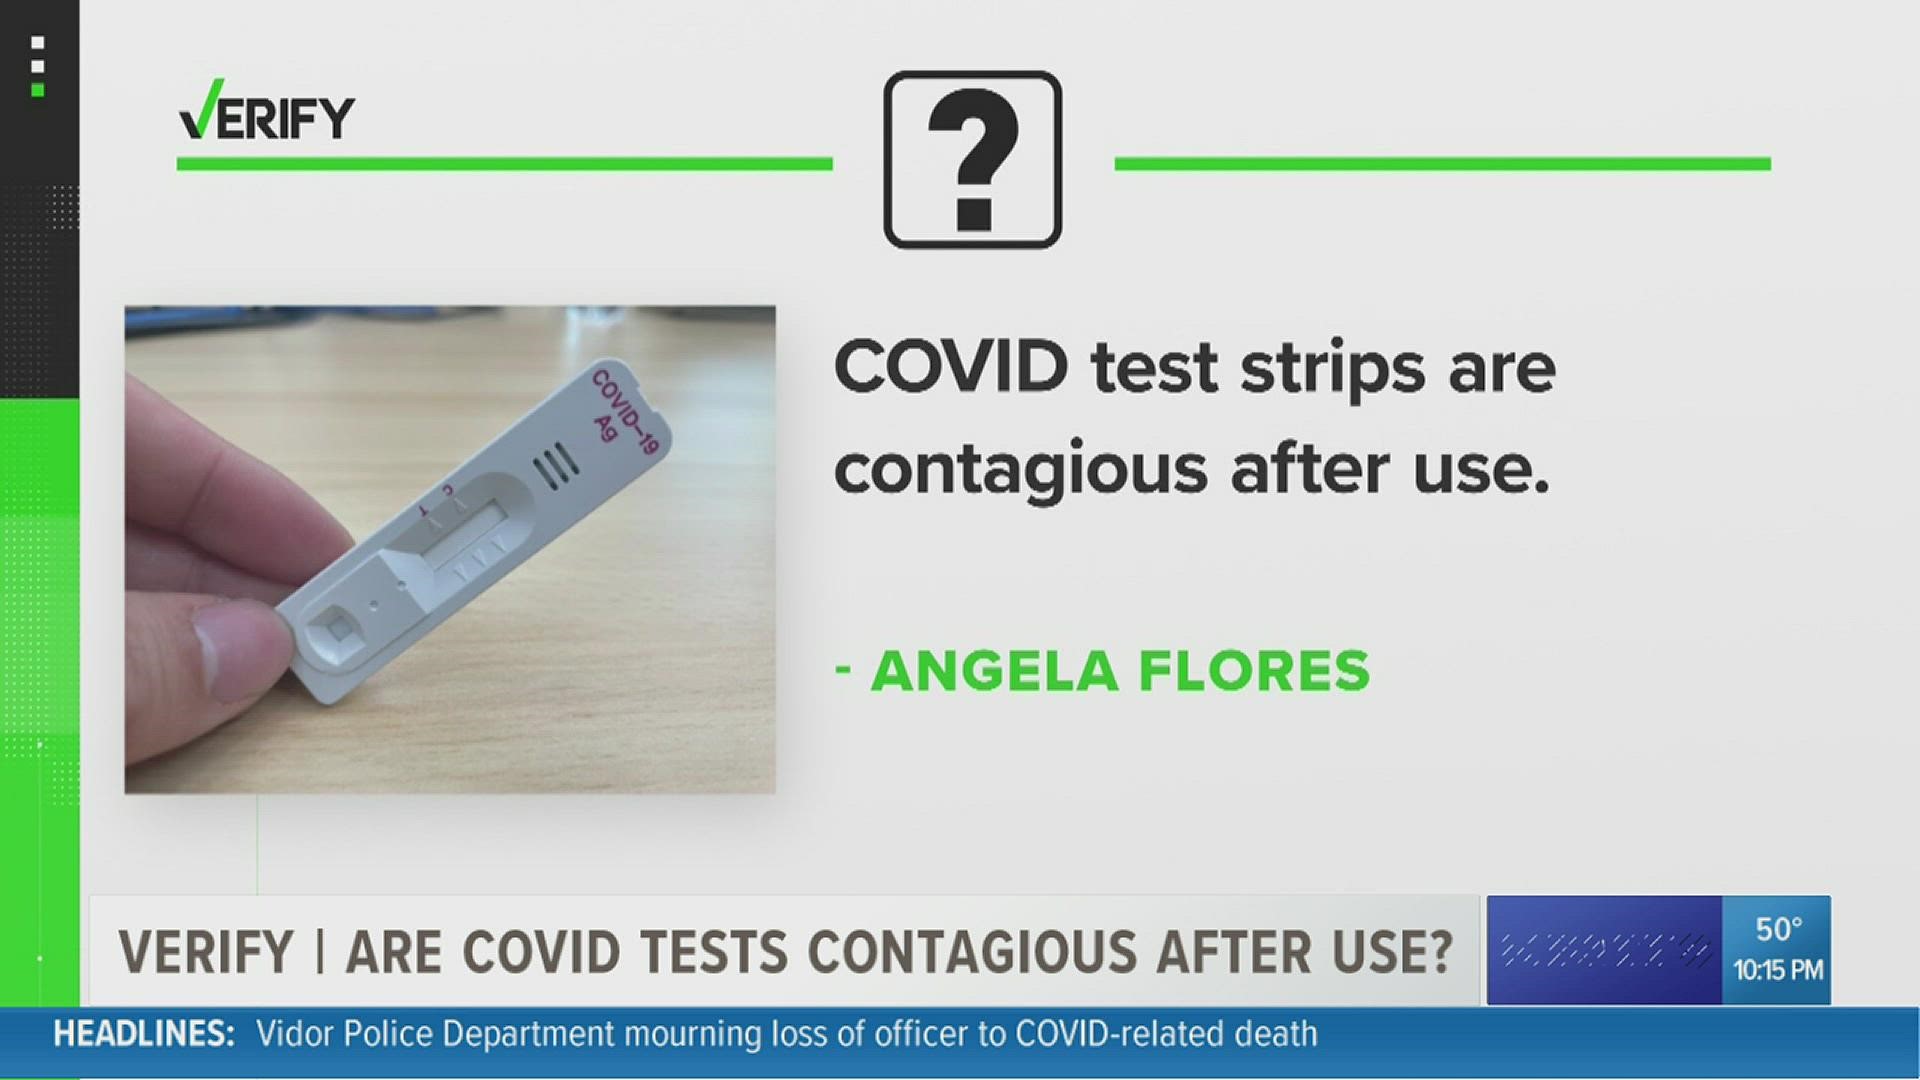 With more people testing for COVID at home, rumors are swirling about how to handle the test after use.